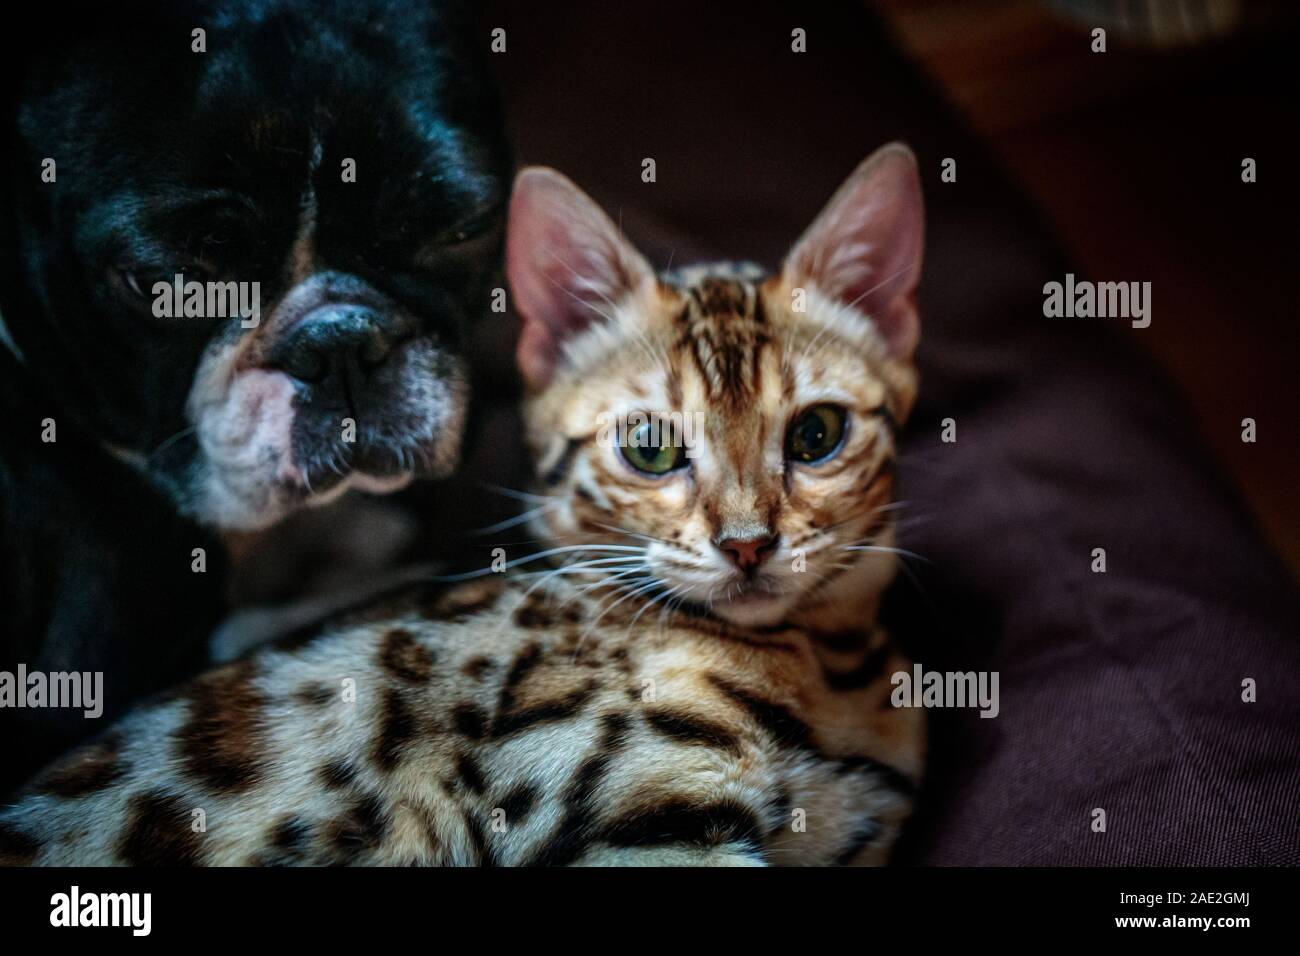 Young Bengal Cat kitten playing and sleeping with her Boston Terrier friend Stock Photo